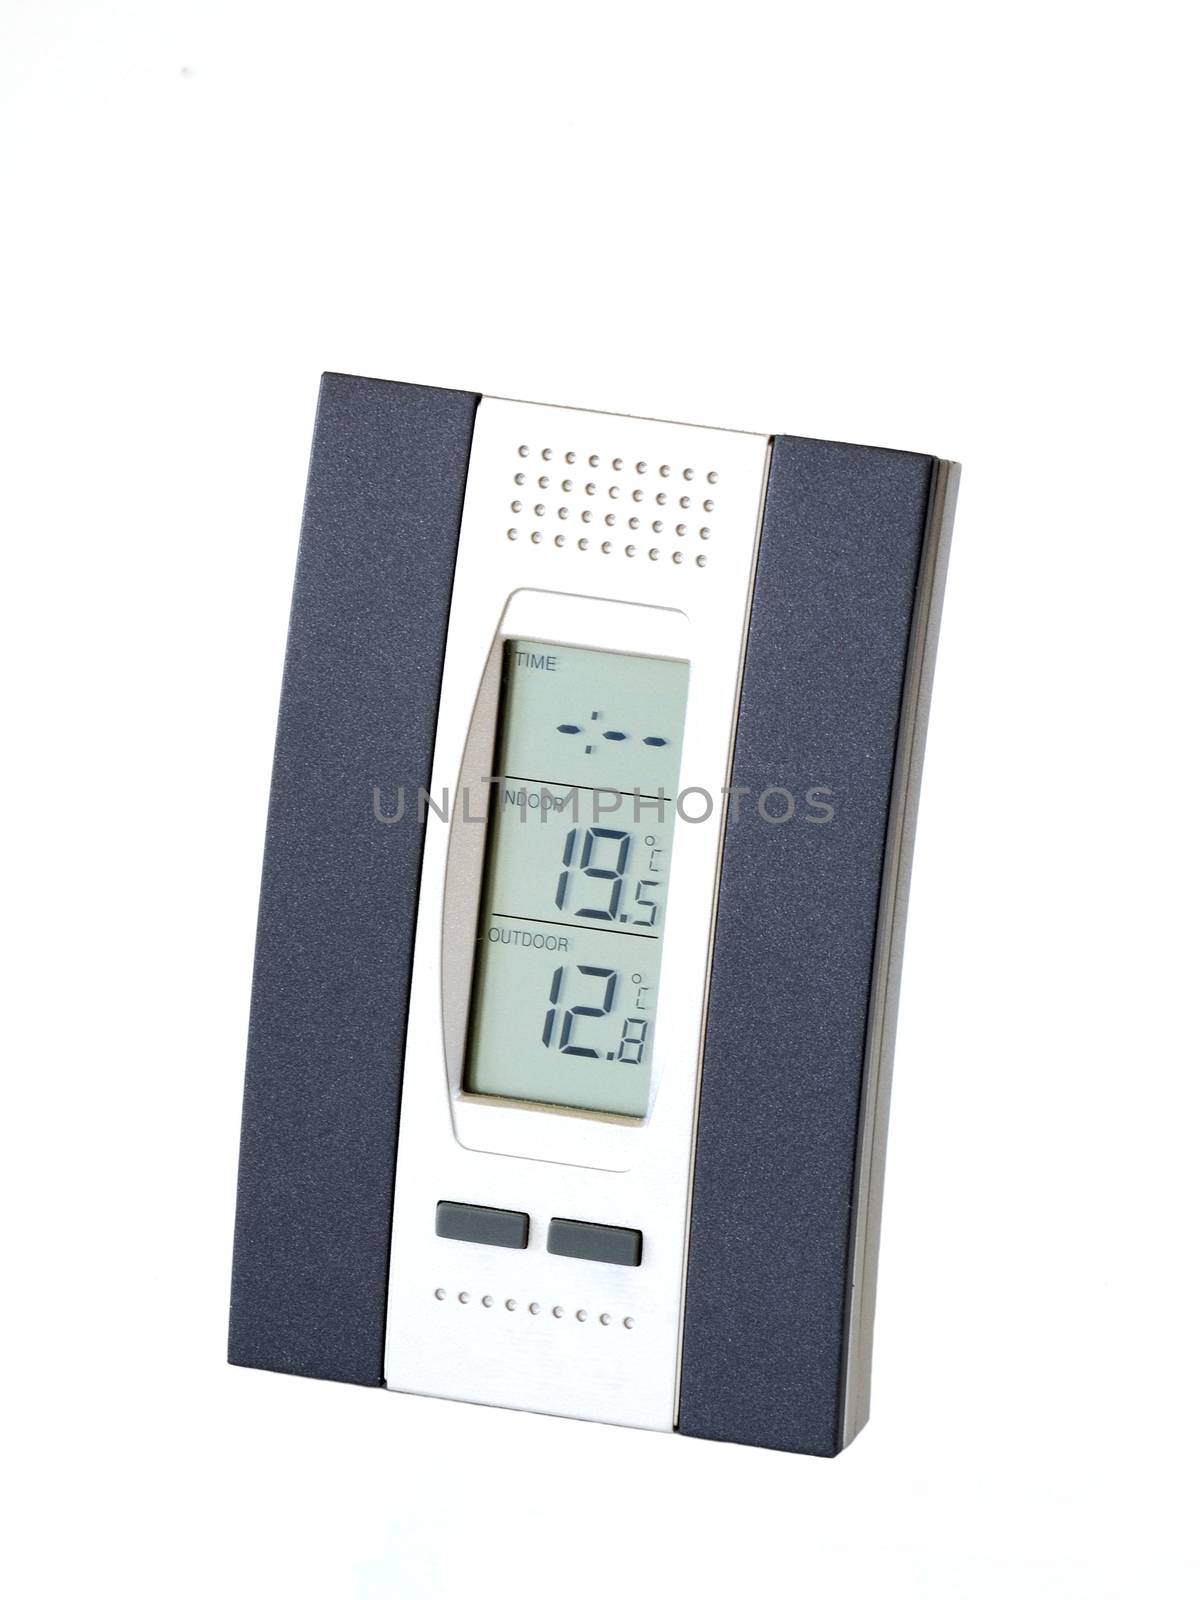 Modern weather station, isolated on white background.